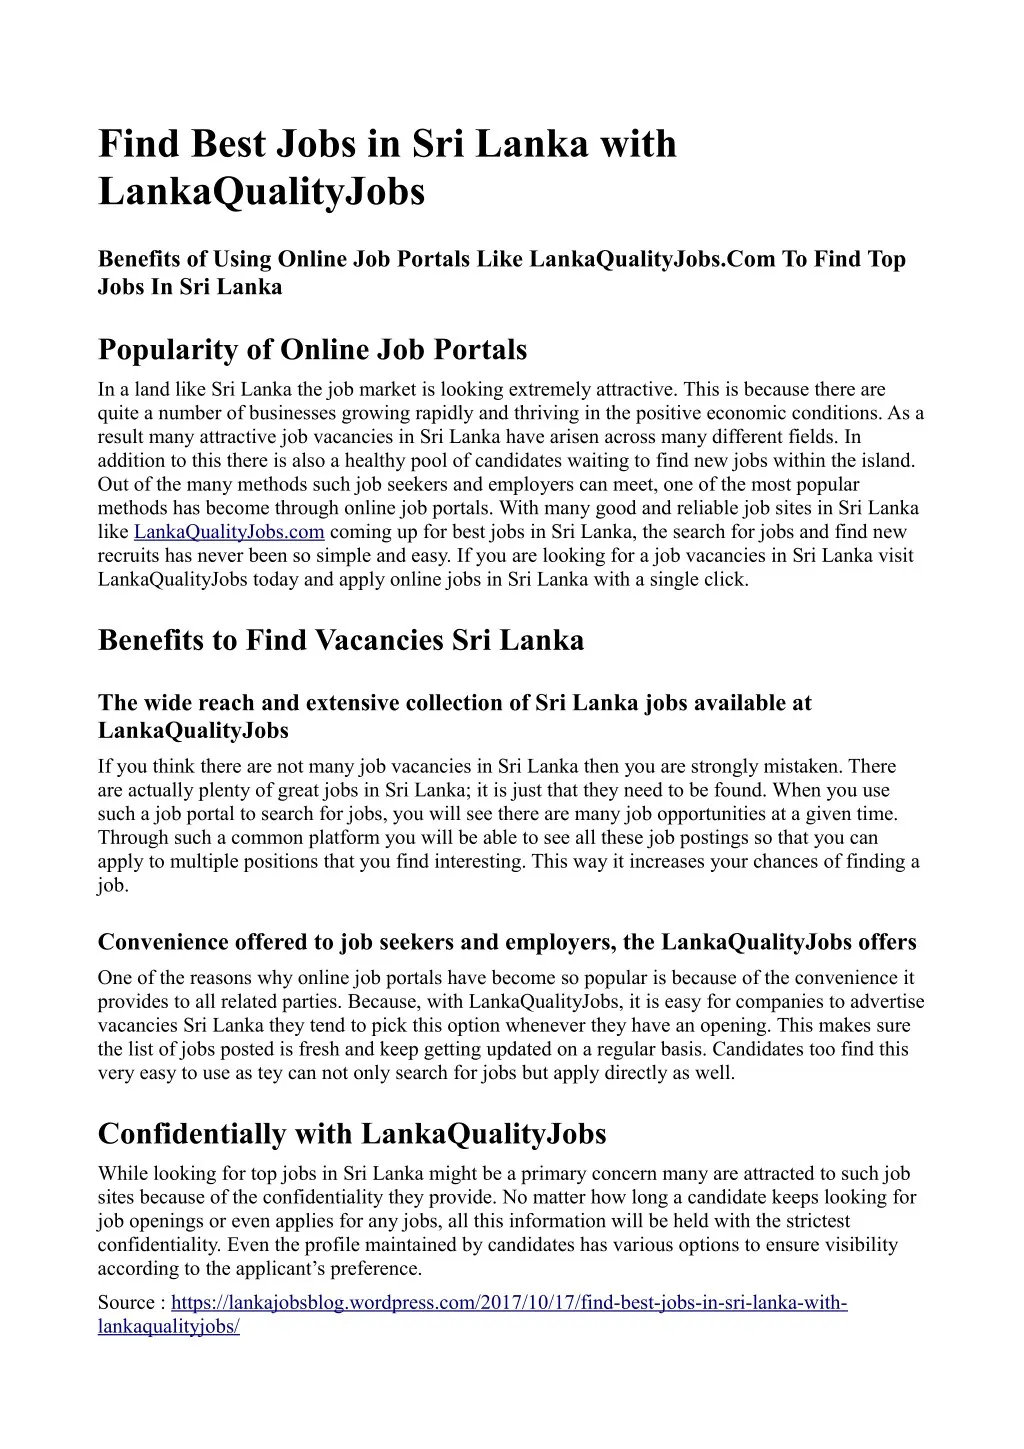 find best jobs in sri lanka with lankaqualityjobs